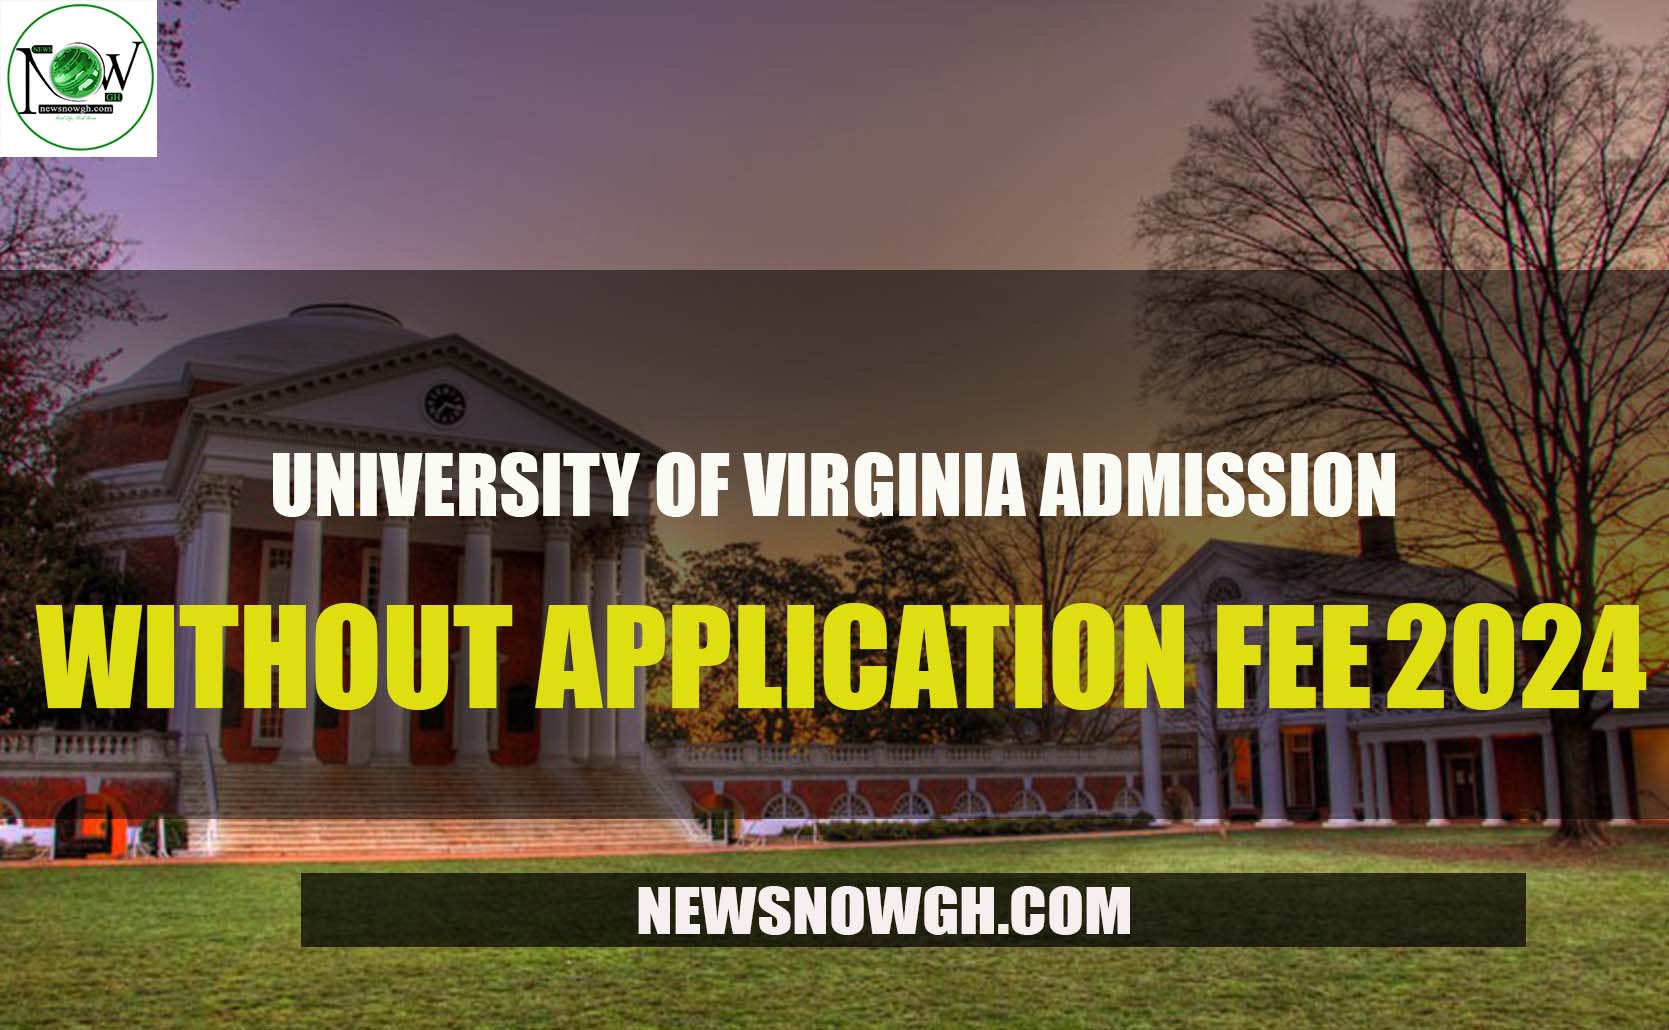 University of Virginia admissions without application fee for 202425